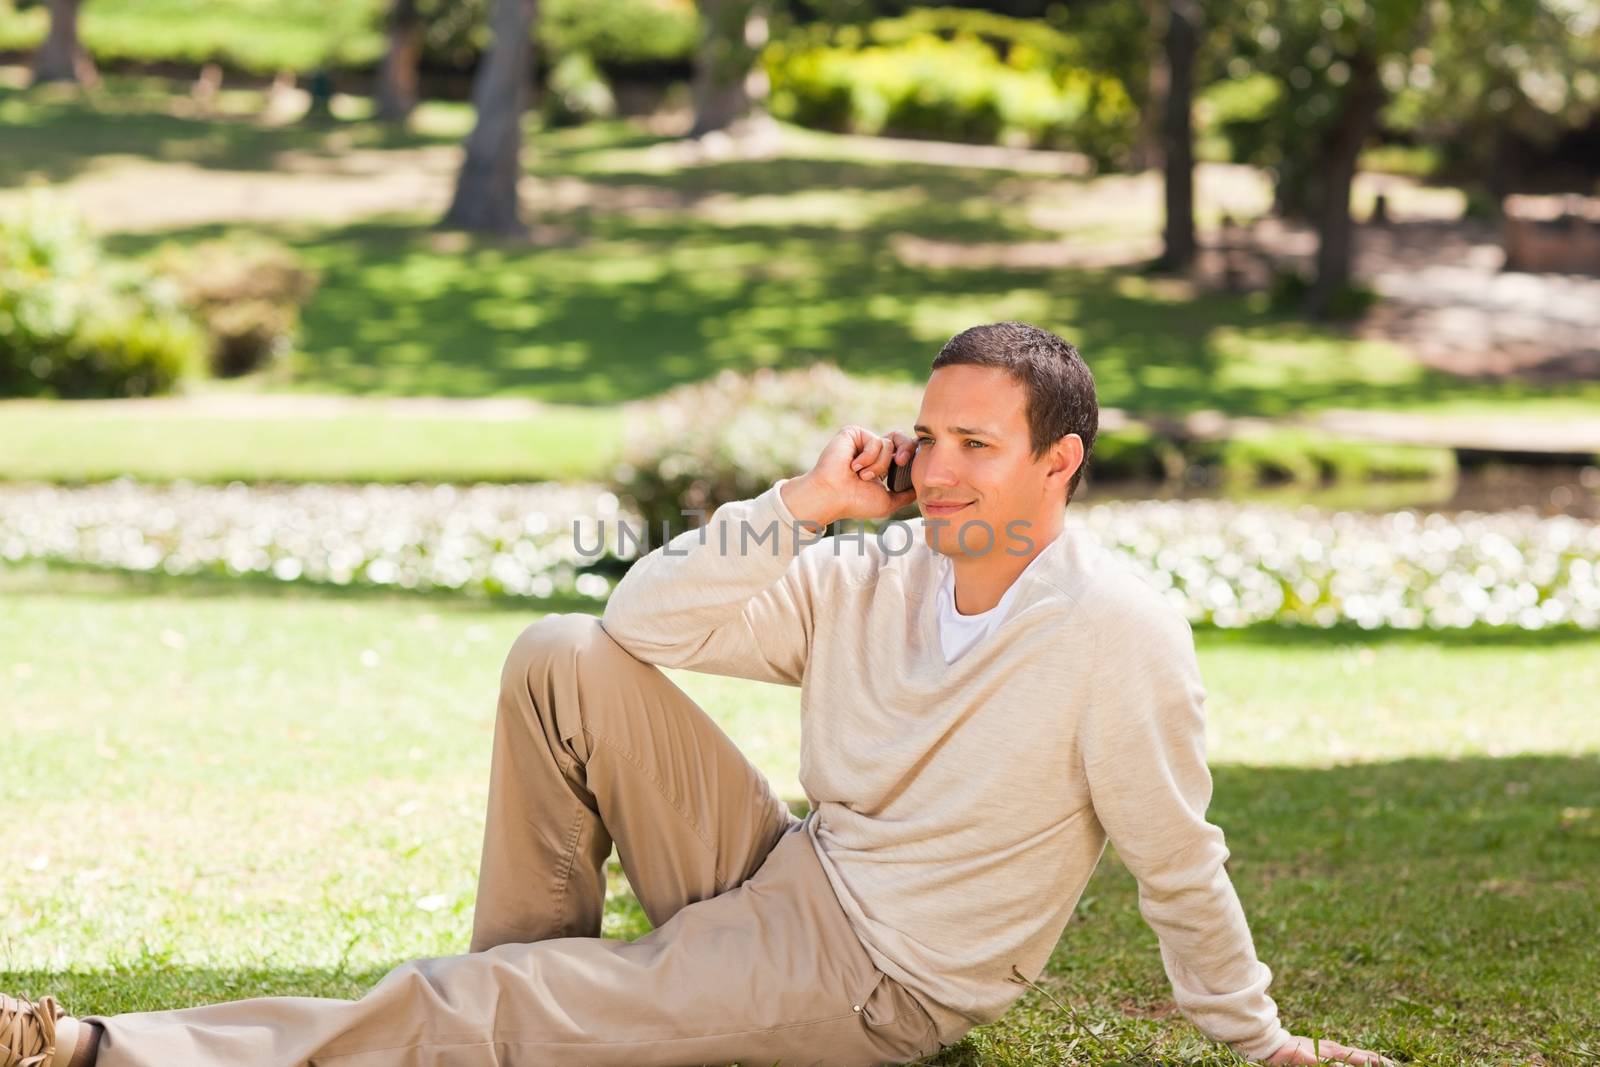 Man phoning in the park by Wavebreakmedia